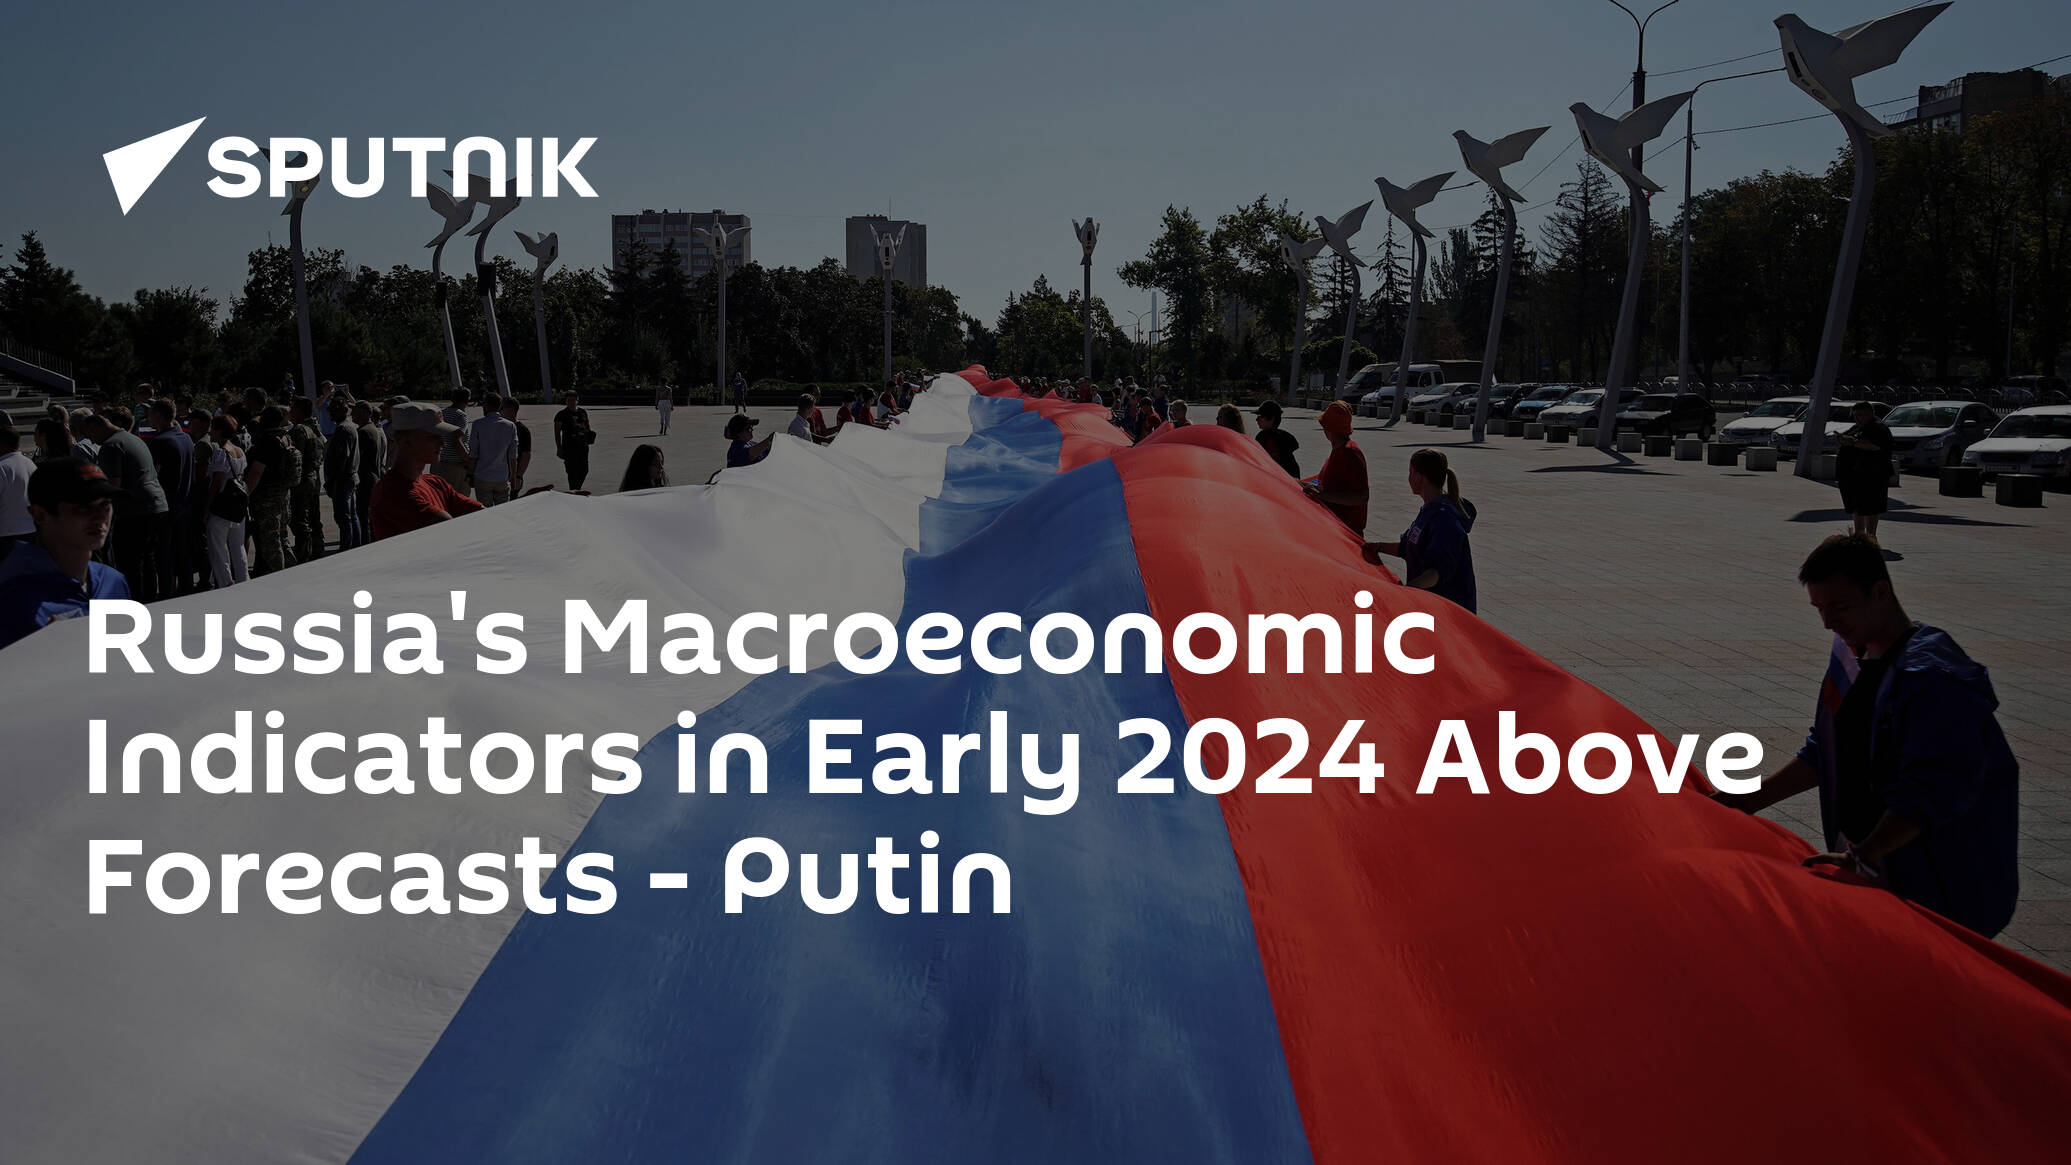 Russia's Macroeconomic Indicators in Early 2024 Above Forecasts - Putin